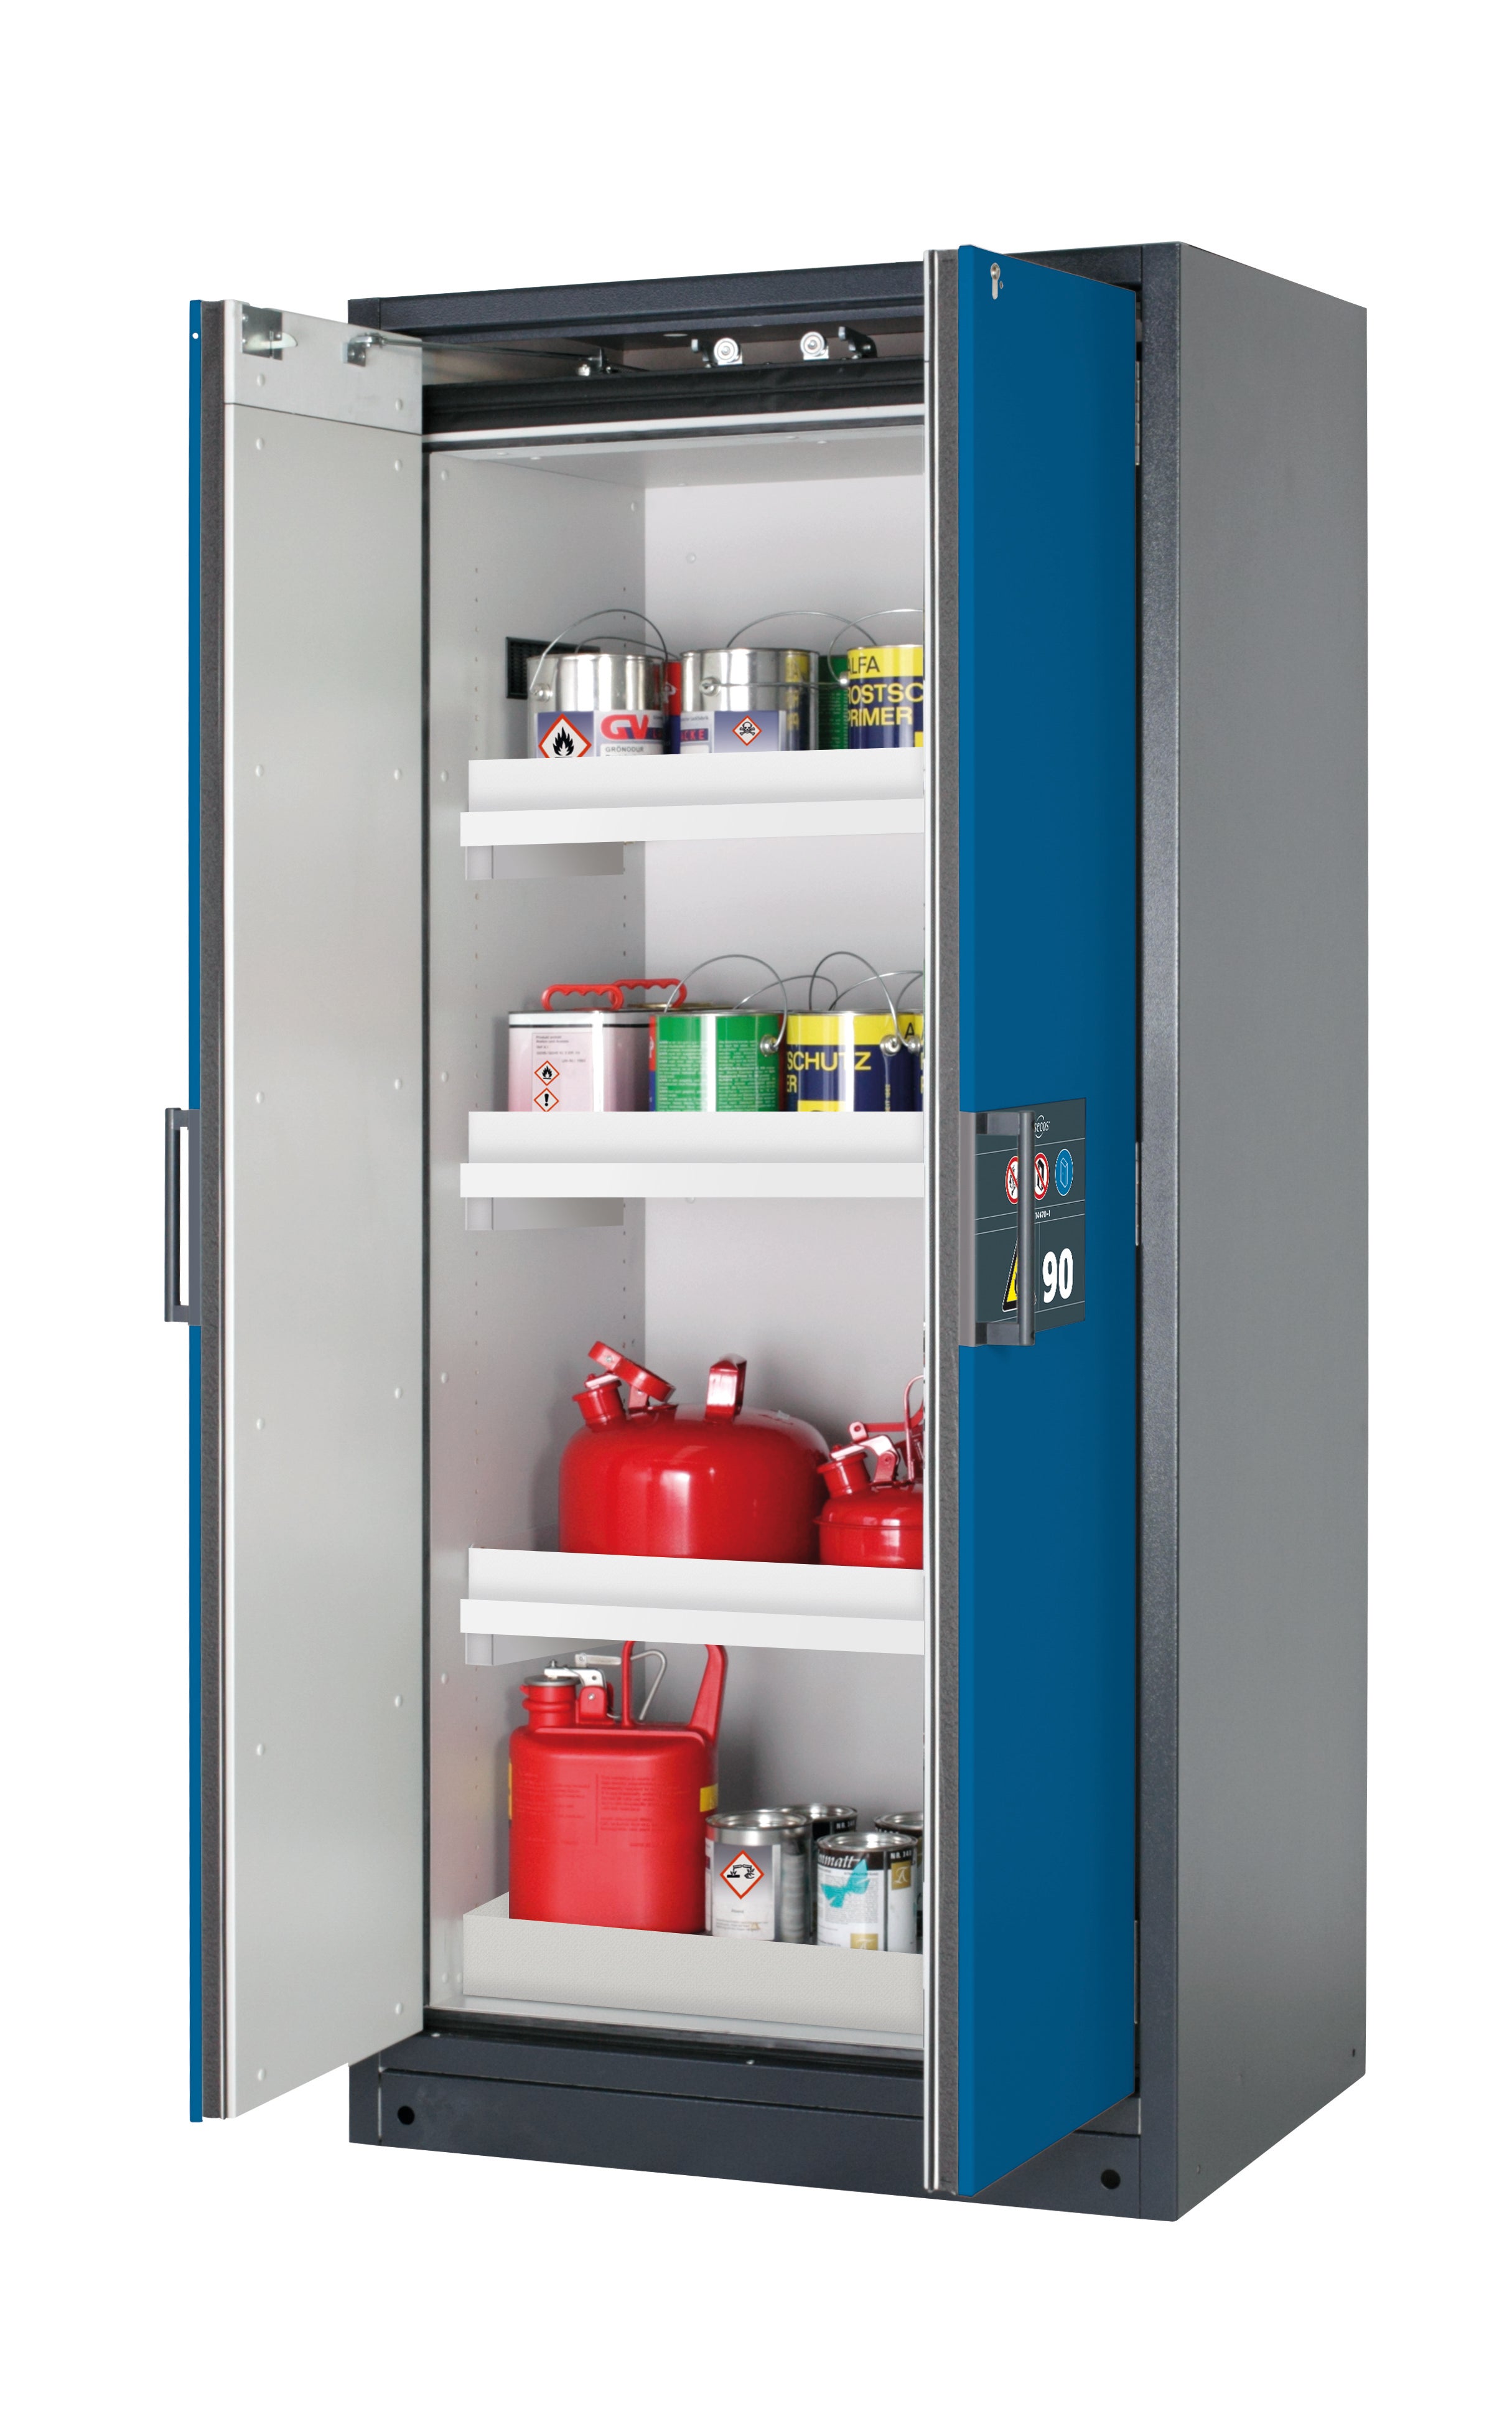 Type 90 safety storage cabinet Q-CLASSIC-90 model Q90.195.090 in gentian blue RAL 5010 with 3x tray shelf (standard) (polypropylene),